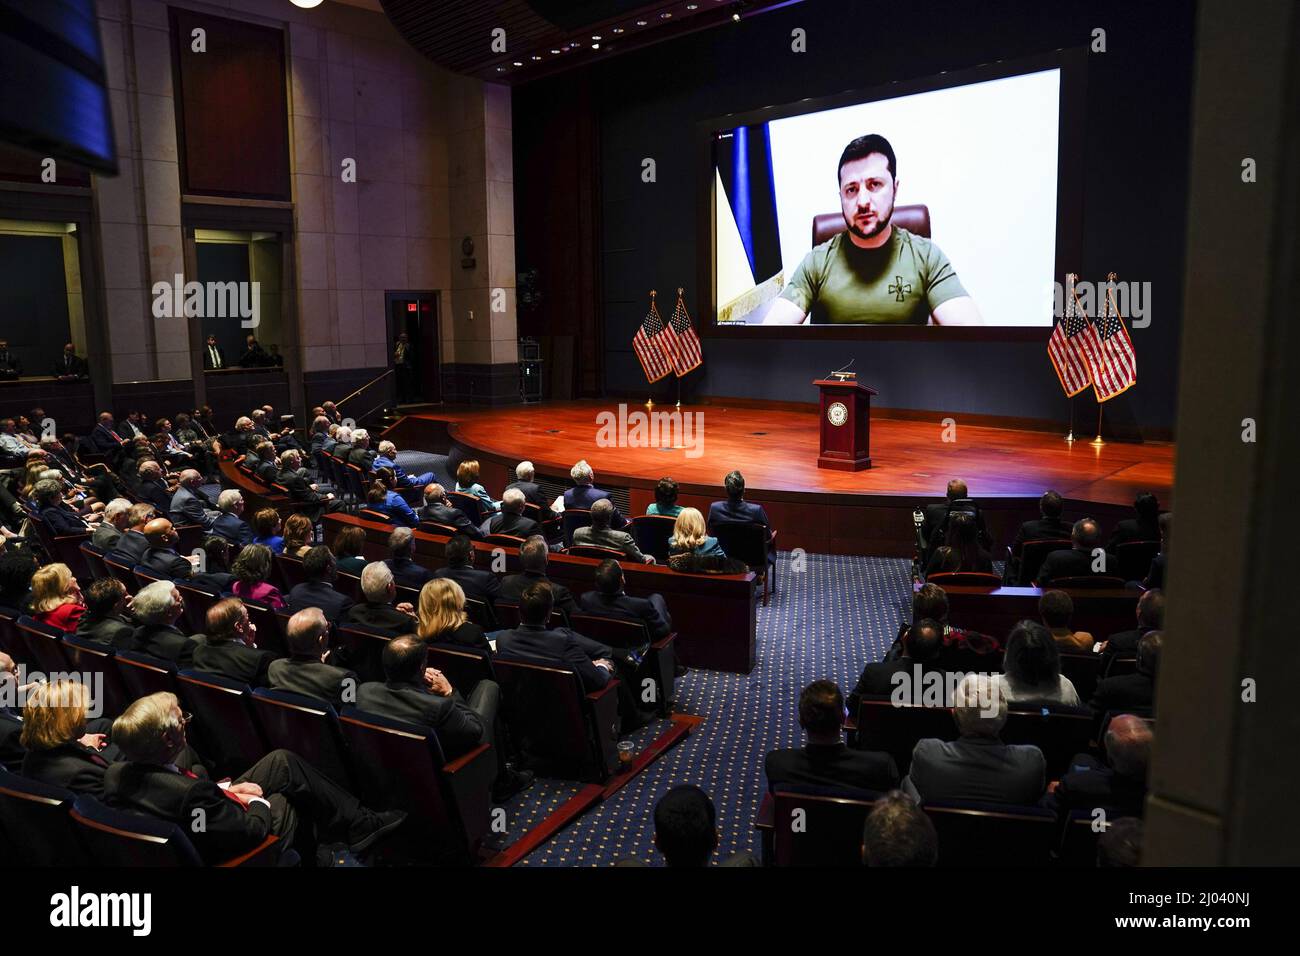 Washington, United States. 16th Mar, 2022. Ukraine's President Volodymyr Zelenskiy delivers a video address to senators and members of the House of Representatives gathered in the Capitol Visitor Center Congressional Auditorium at the U.S. Capitol in Washington, DC on March 16, 2022. Pool photo by Sarah Silbiger/UPI Credit: UPI/Alamy Live News Stock Photo